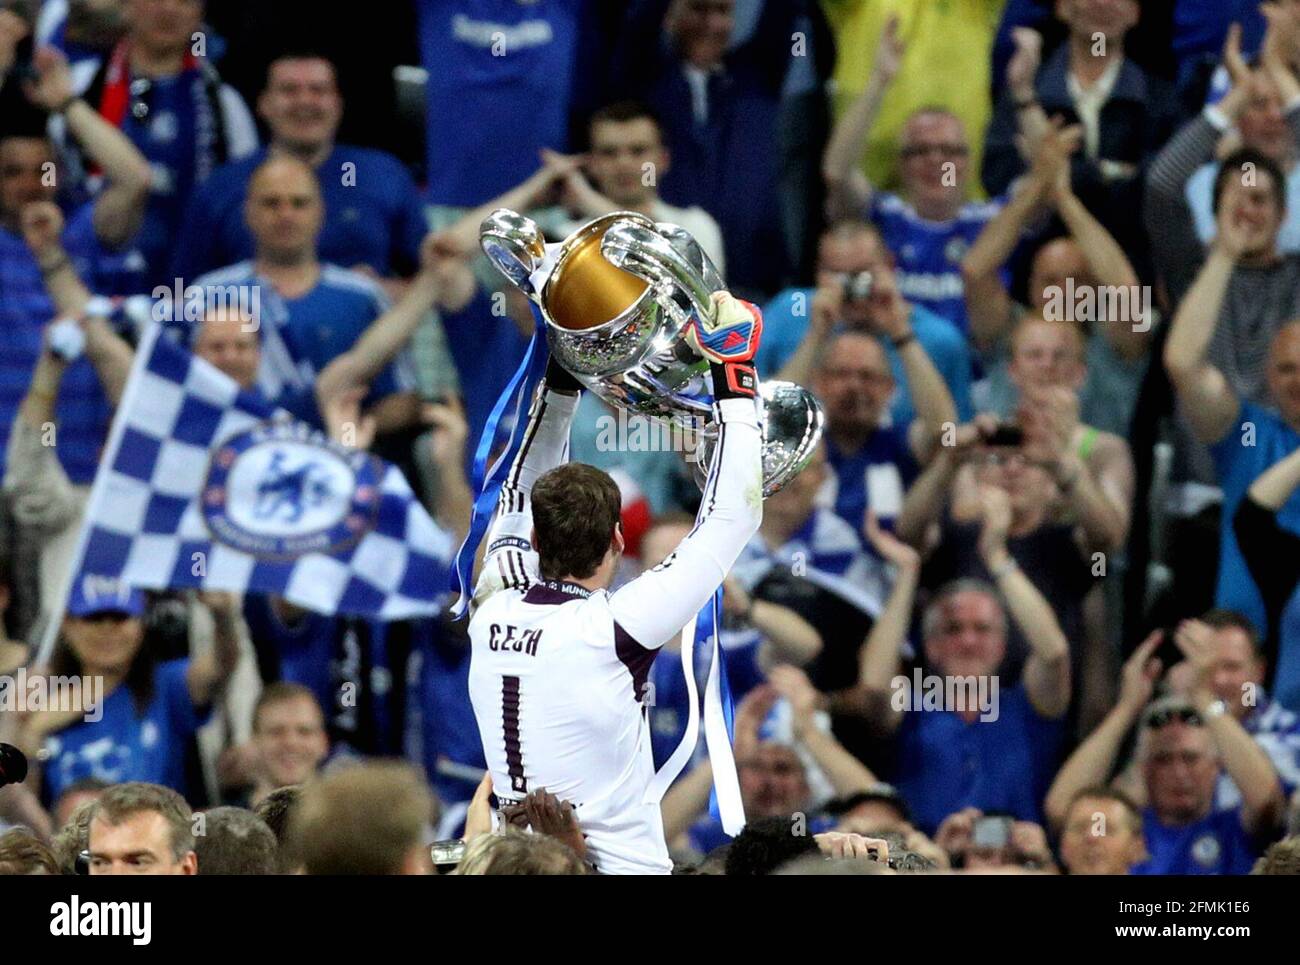 Champions League Winner FC Chelsea celebrates the victory Petr Cech  with the trophy  Finale FC Chelsea - FC Bayern Muenchen 2011 / 2012 UEFA Champions league Final FC Chelsea - FC Bayern  5 : 4   Munich 19. 5. 2012 e© diebilderwelt / Alamy Stock Stock Photo